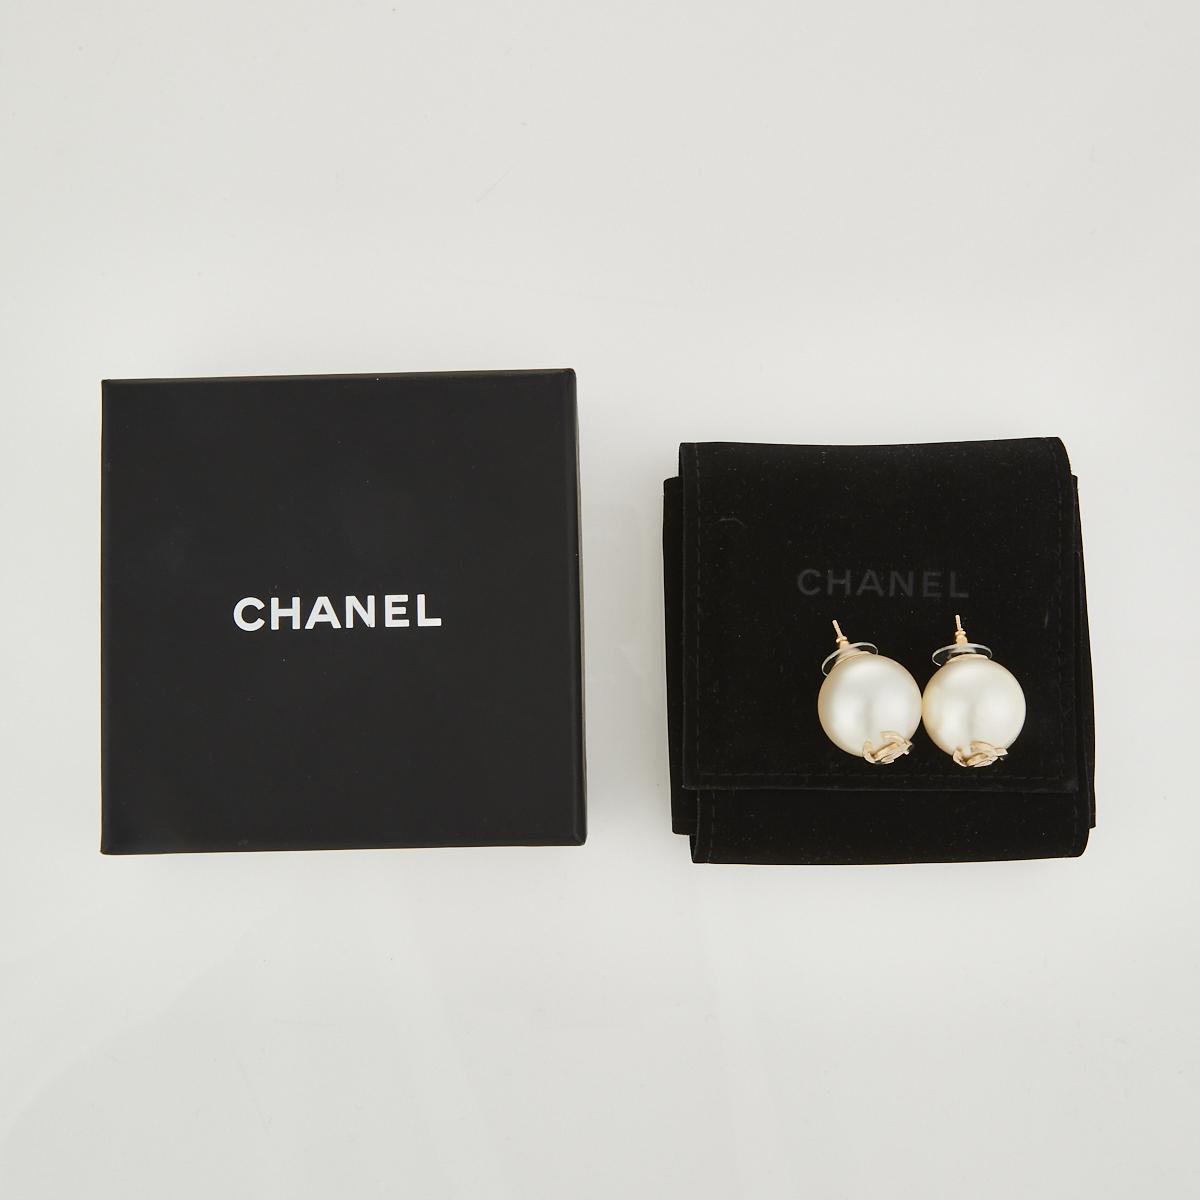 Chanel Faux Pearl CC Stud Earrings with Box